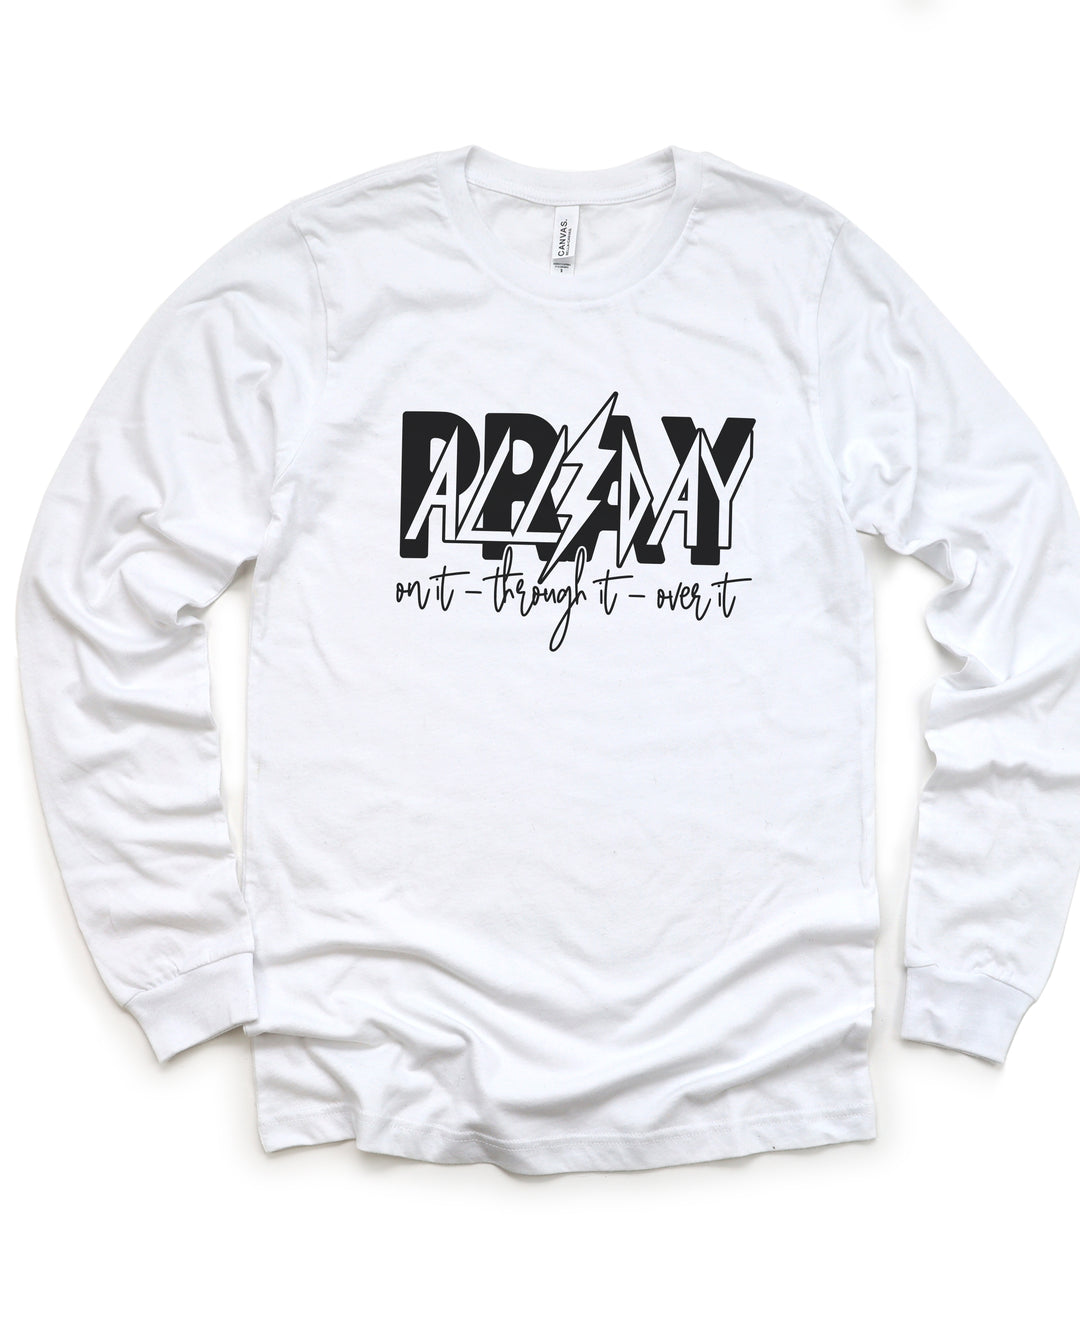 Pray All Day: On It, Through It, Over It - Unisex Long-Sleeve Tee